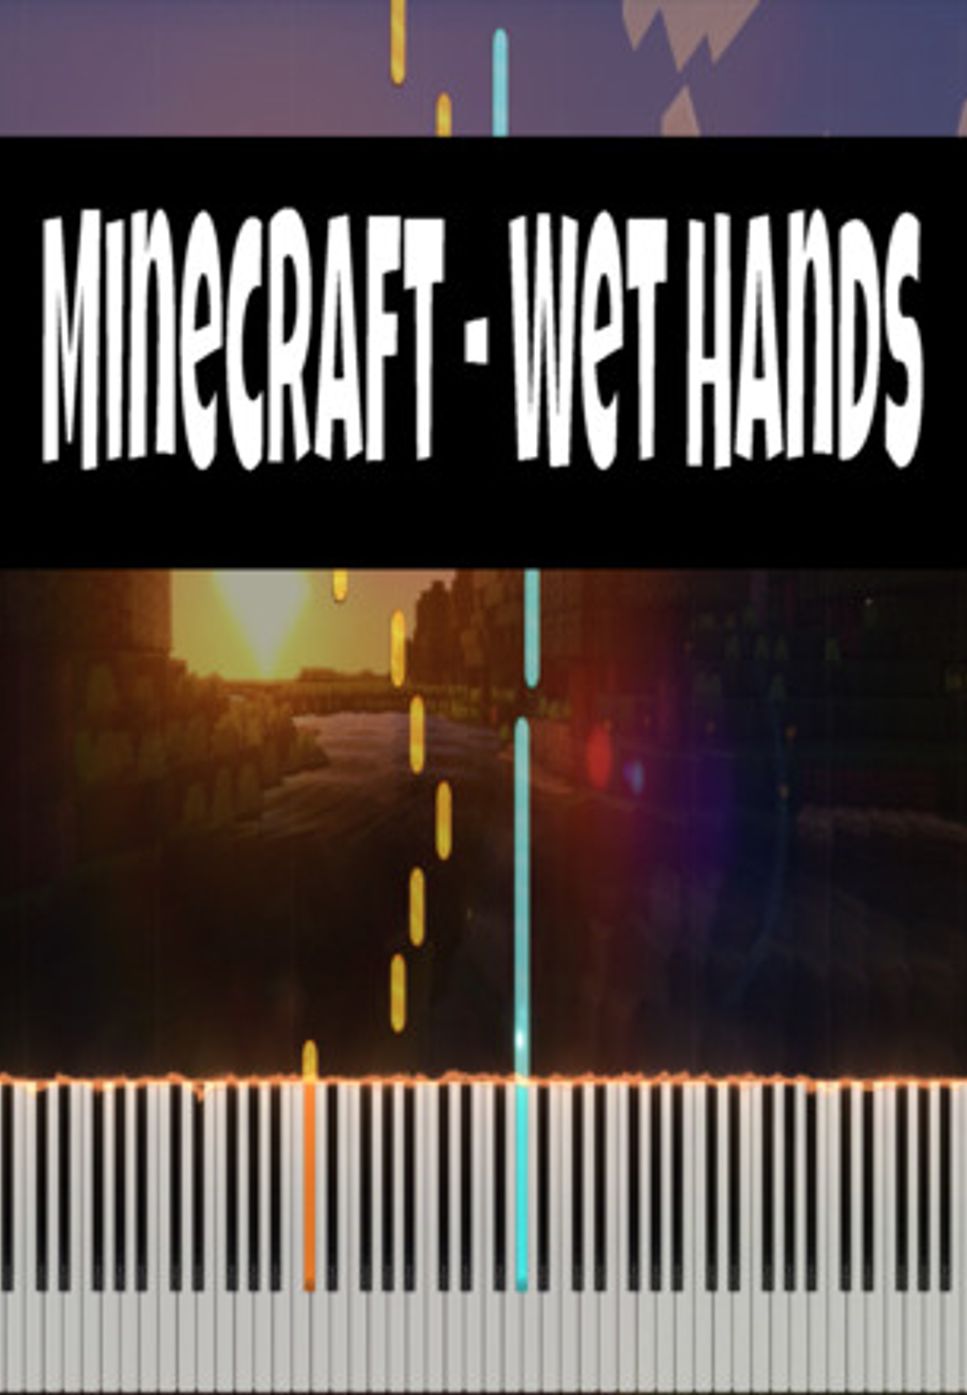 C418 - Wet Hands by Vincent Payet